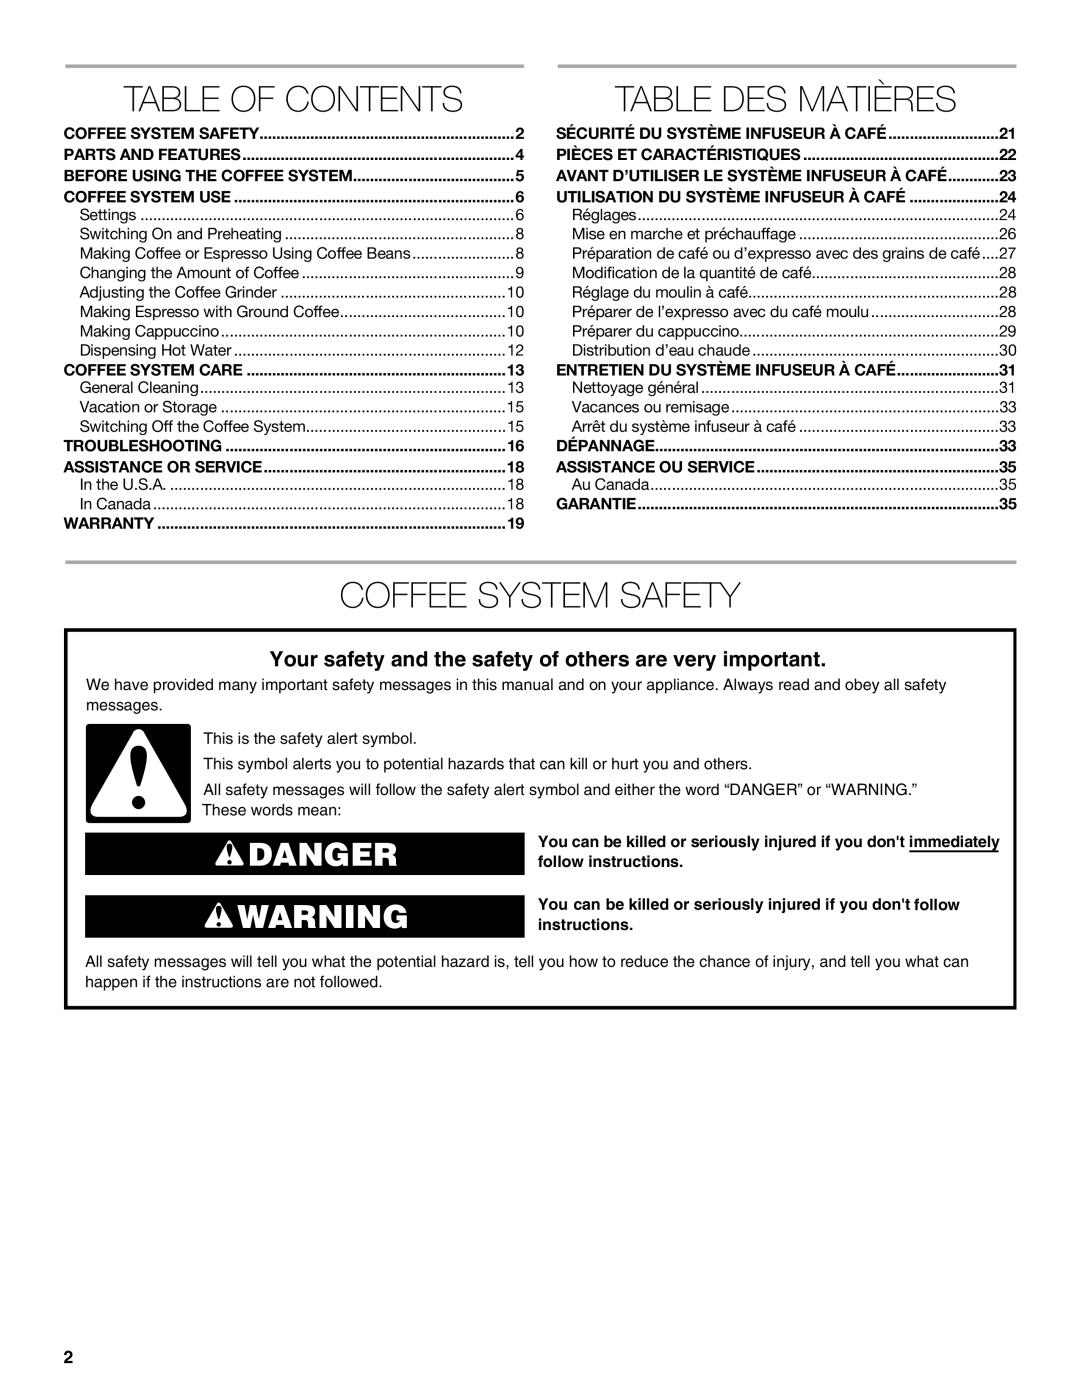 Jenn-Air JBC7624BS Table Of Contents, Table Des Matières, Coffee System Safety, Danger, Parts And Features, Dépannage 